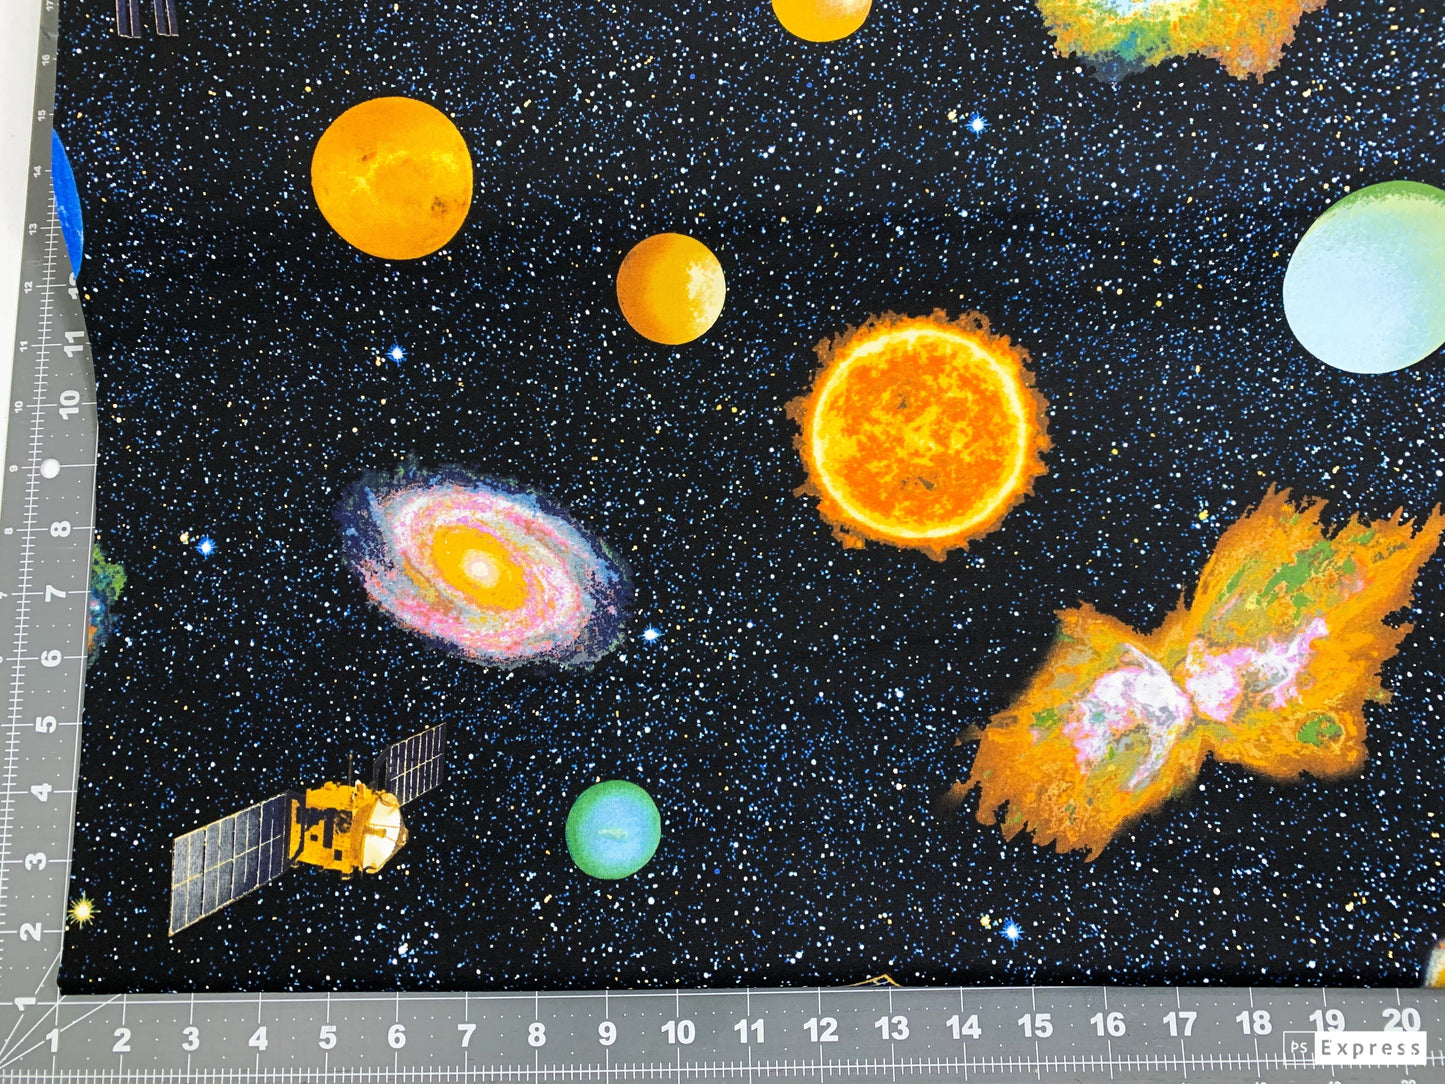 Planetary Missions Space fabric 5303-97 Outer Space